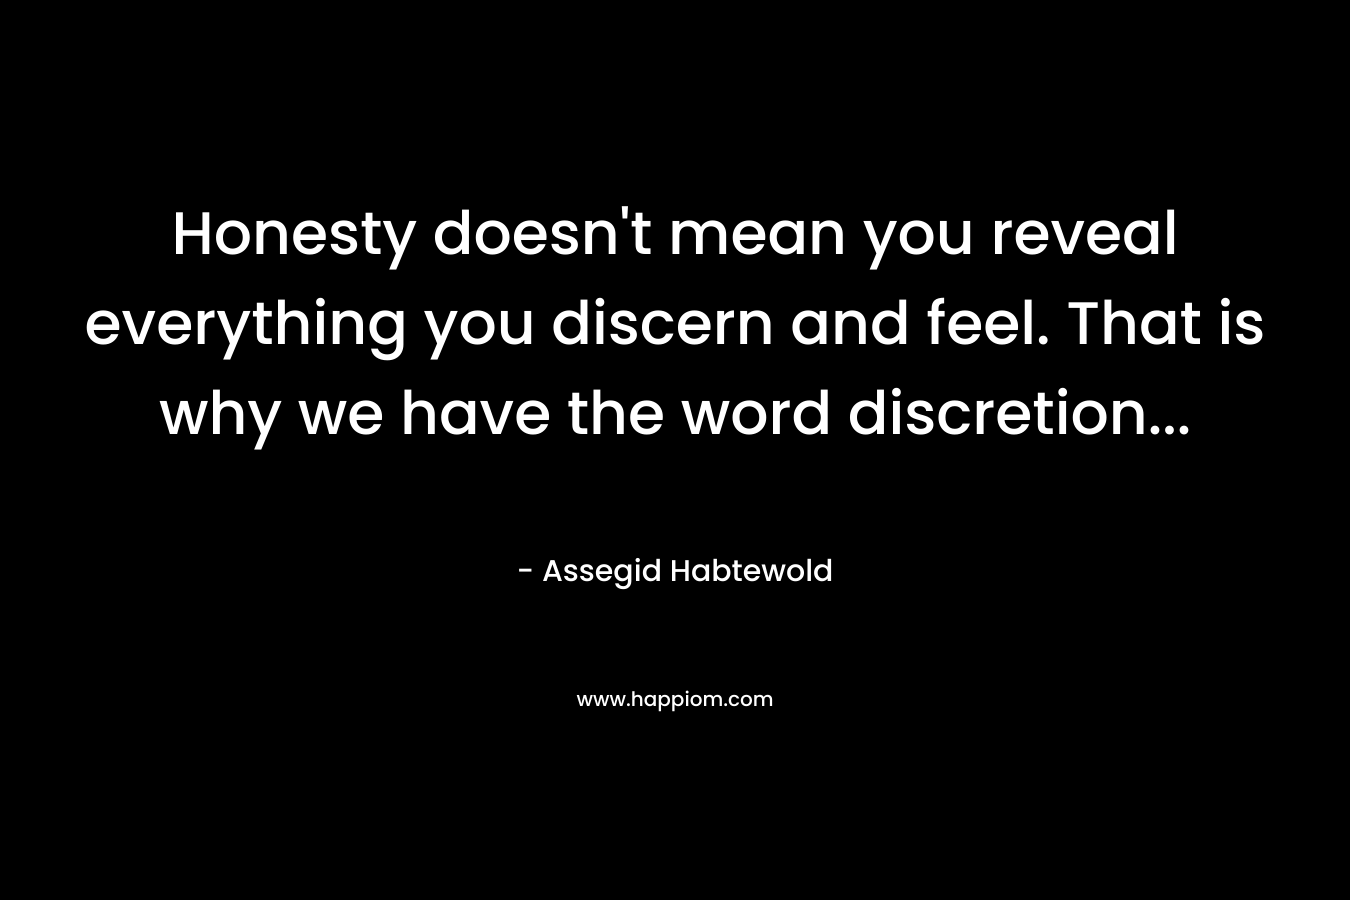 Honesty doesn't mean you reveal everything you discern and feel. That is why we have the word discretion...